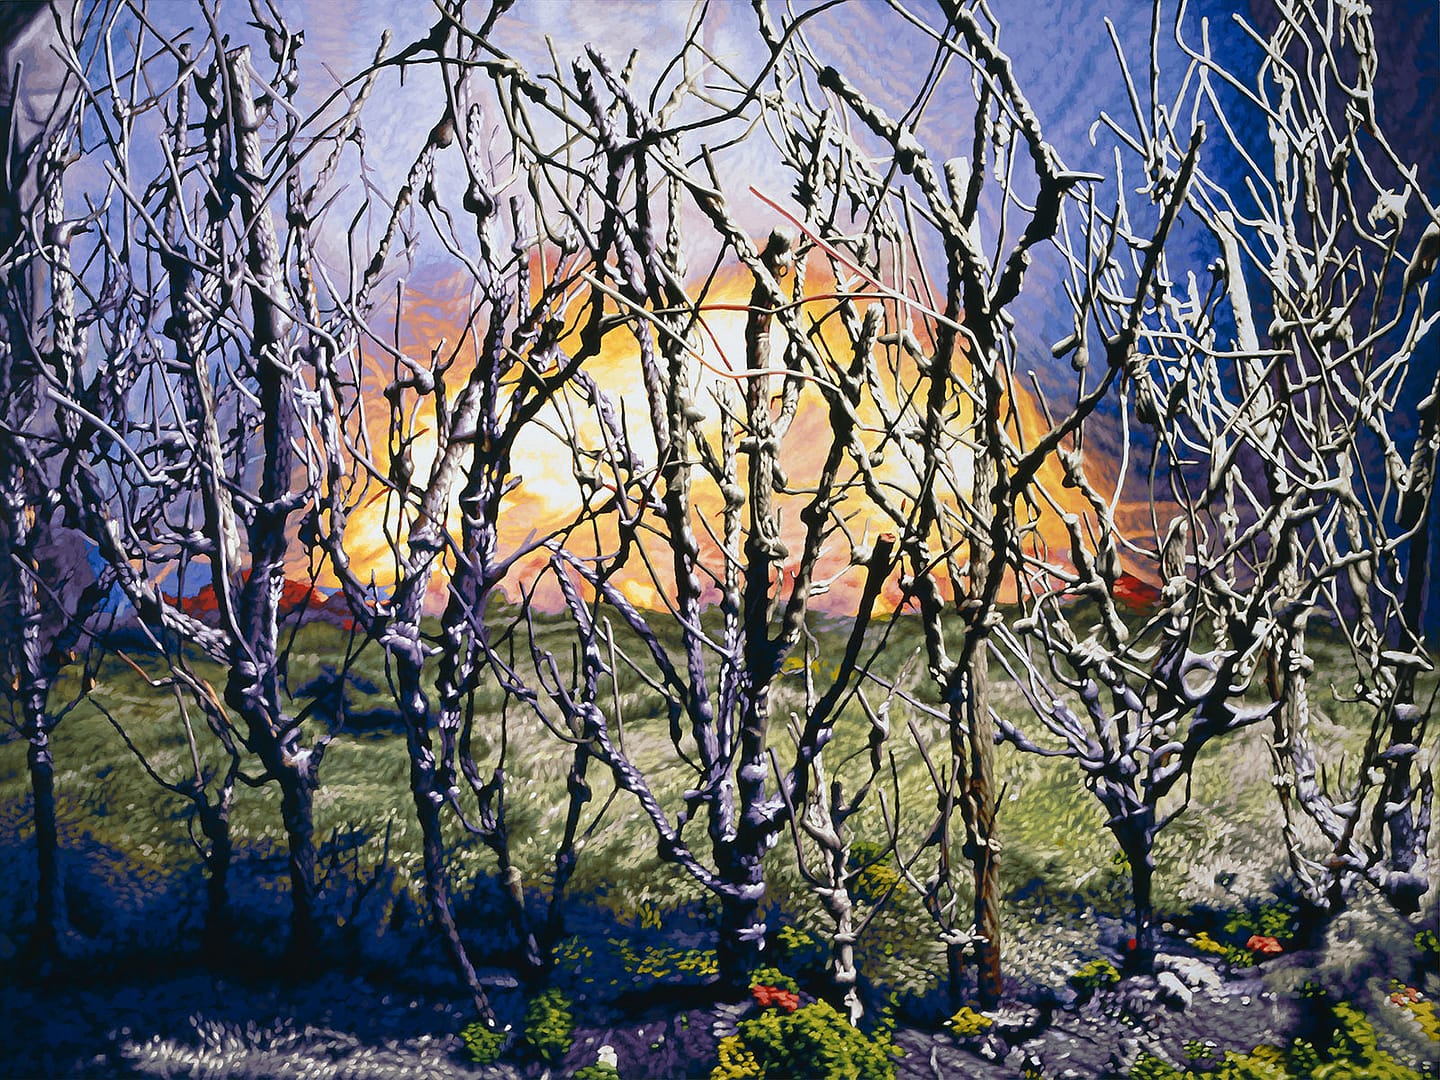 Tempera painting by Philipp Fröhlich showing an explosion behind tree structures. Originally shown at the solo exhibition "Scare the Night Away" at Soledad Lorenzo gallery in 2010